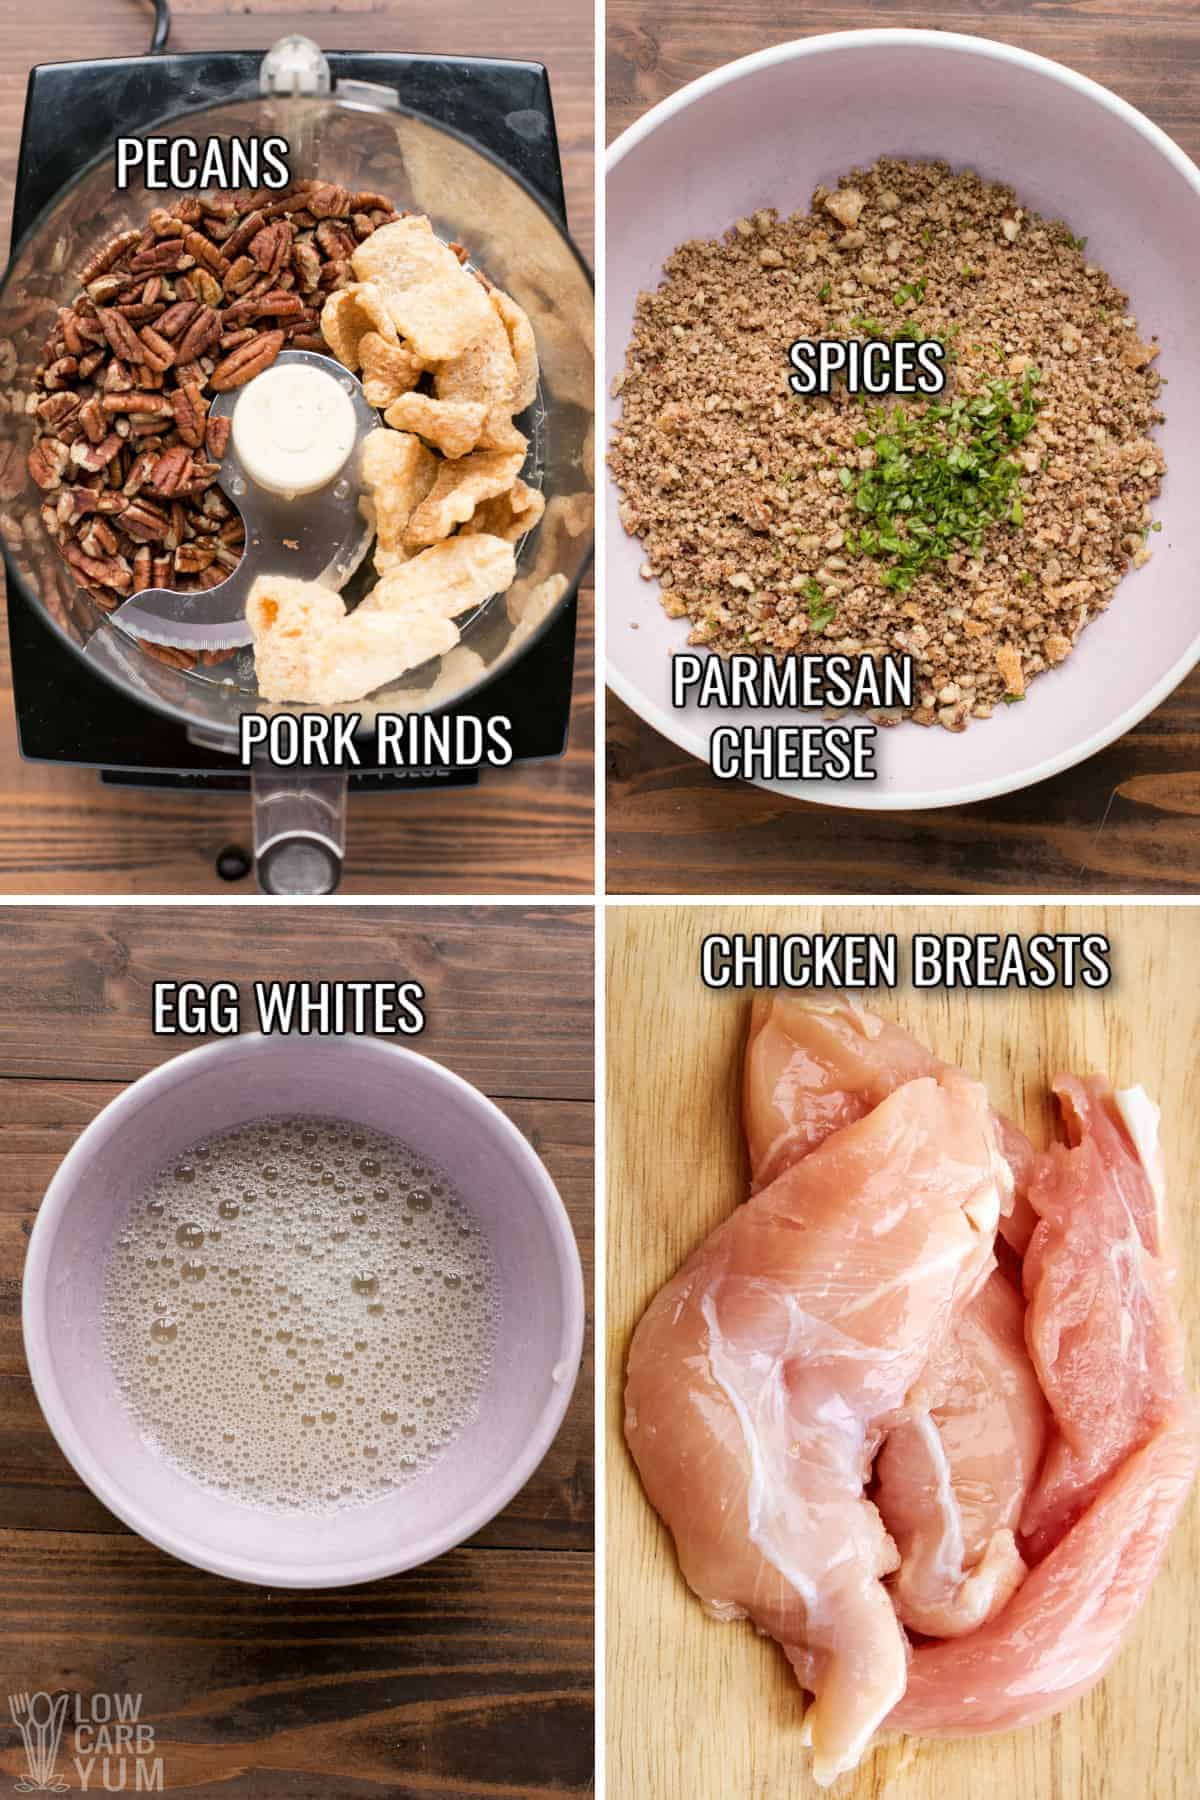 ingredients for pecan crusted chicken.